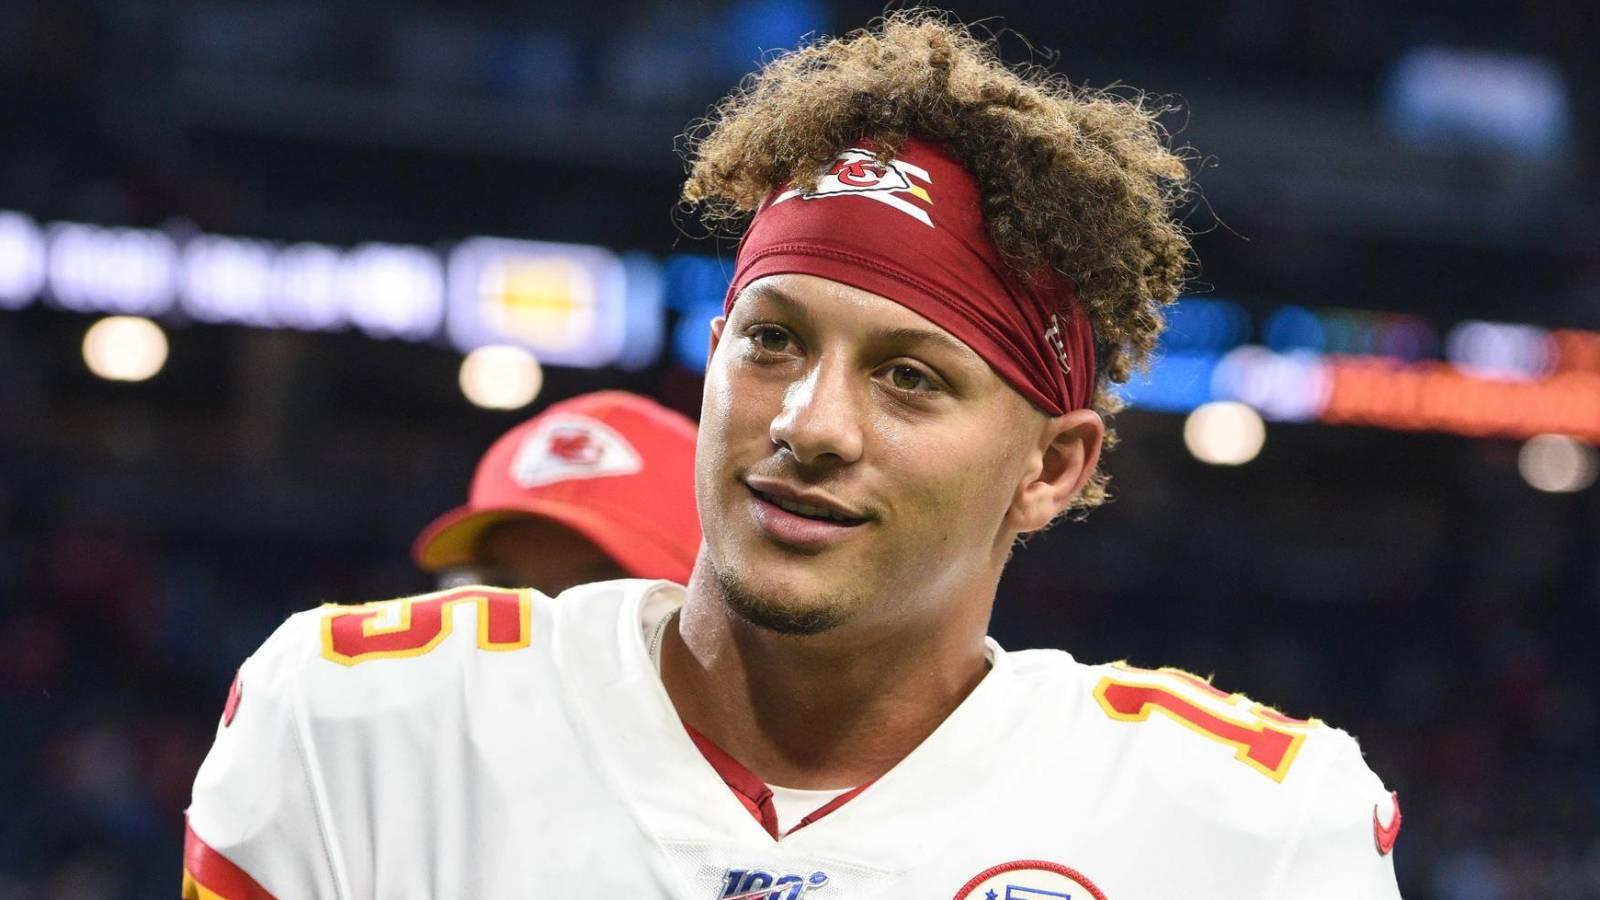 Report: Patrick Mahomes expected to land contract extension this